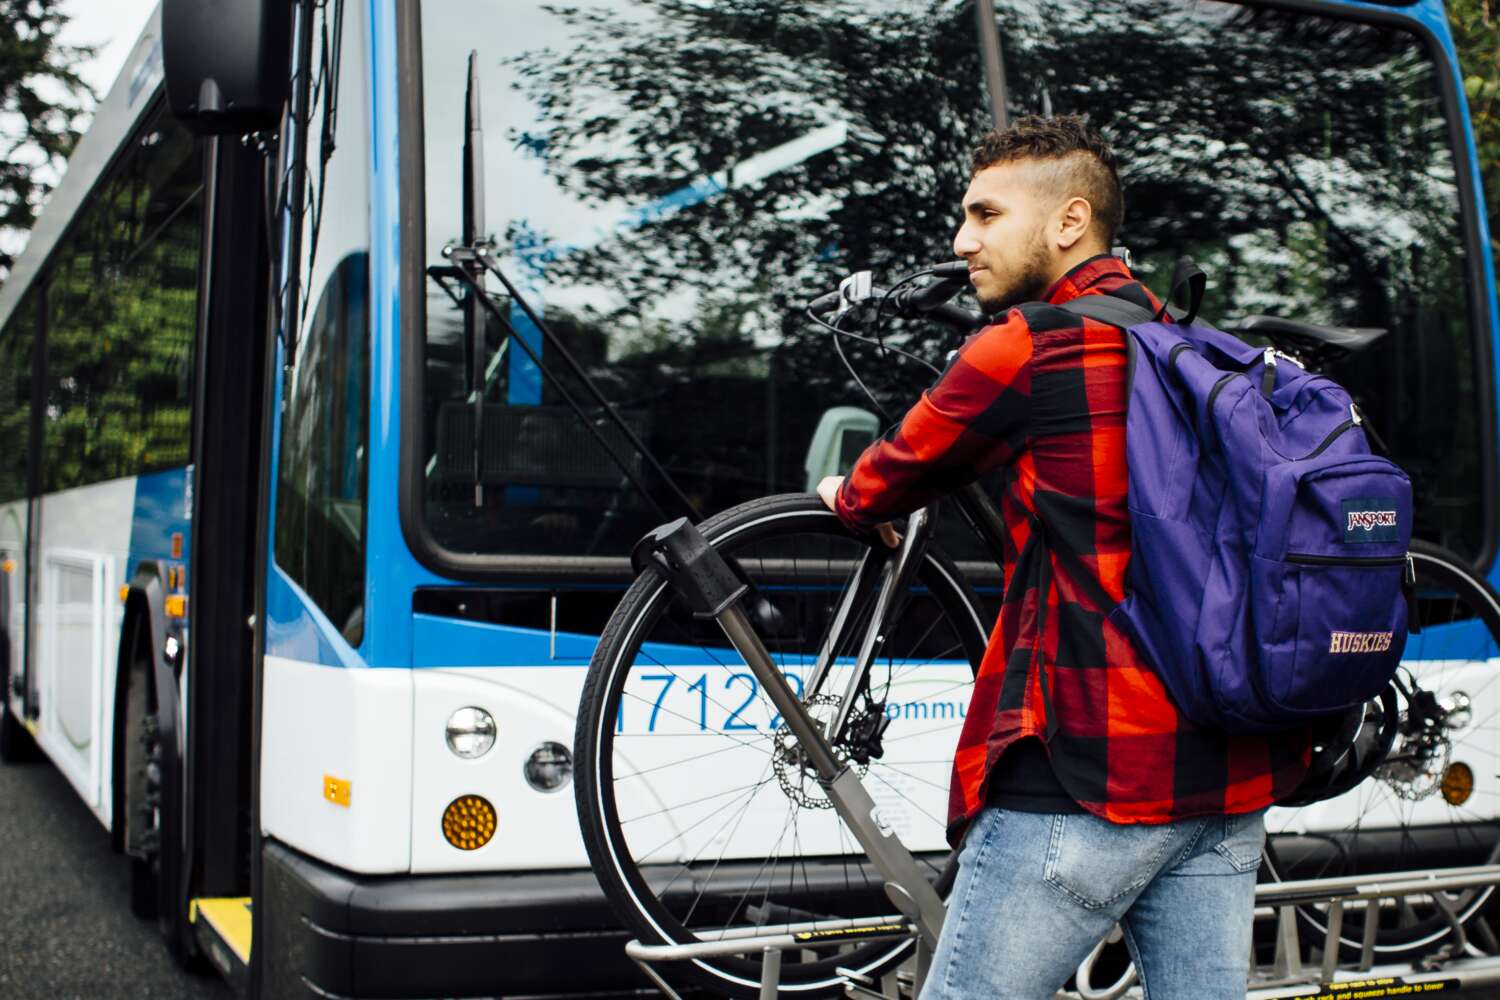 Rider loads his bike on the bike rack in front of the bus